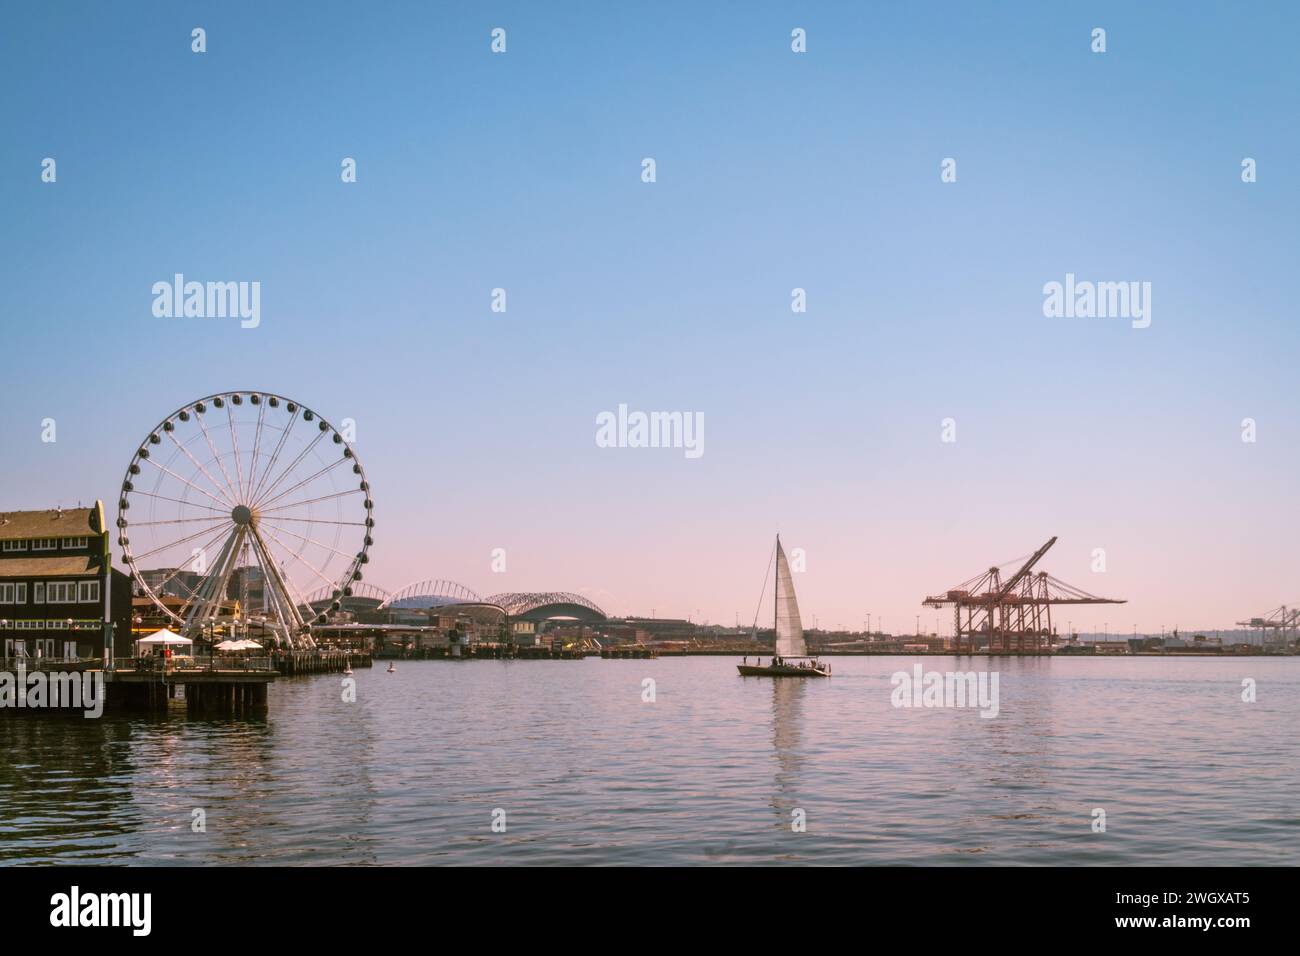 Seattle skyline with Waterfront neighborhood and ferris wheel in foreground. Stock Photo